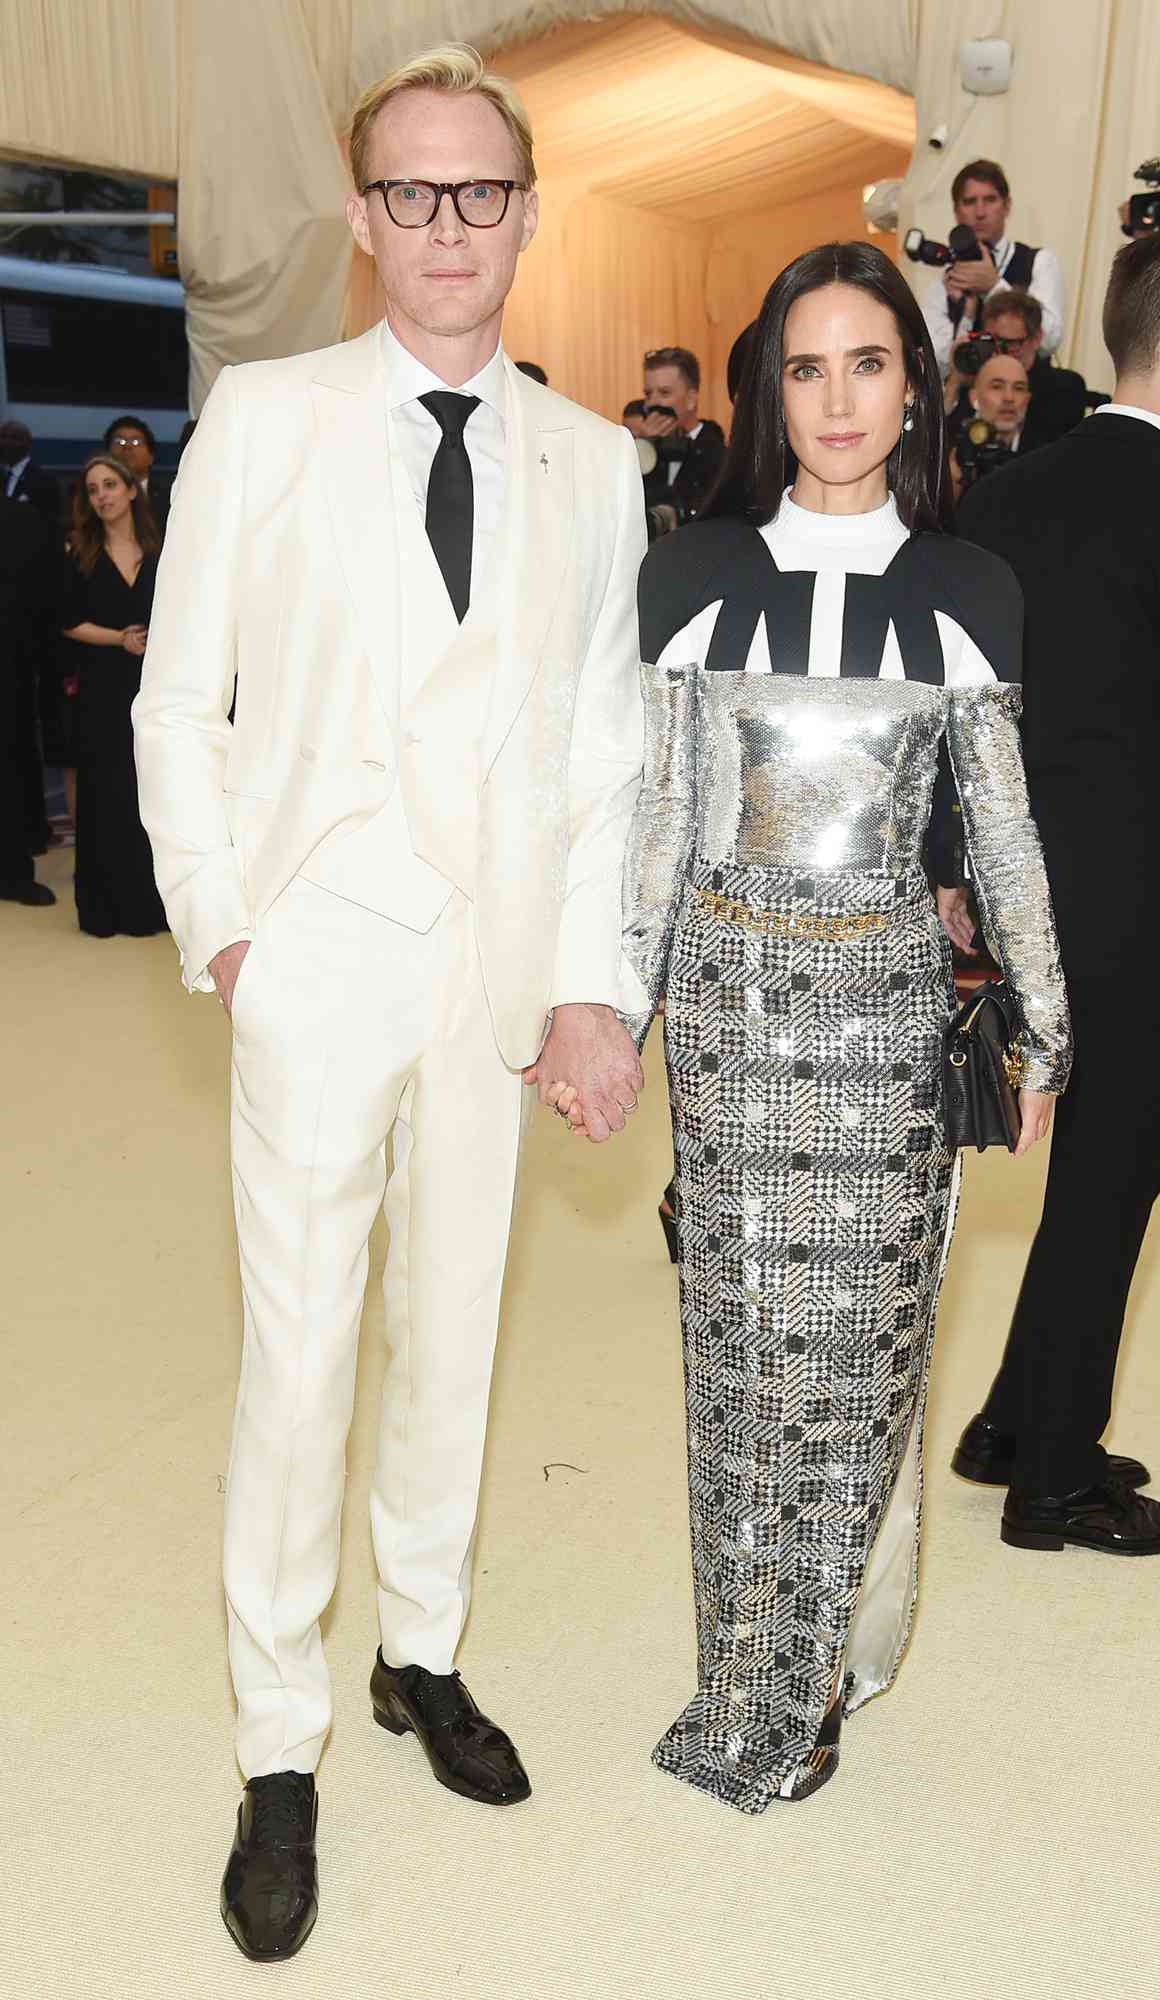 Paul Bettany and Jennifer Connelly attend the Heavenly Bodies: Fashion & The Catholic Imagination Costume Institute Gala at The Metropolitan Museum of Art on May 7, 2018 in New York City